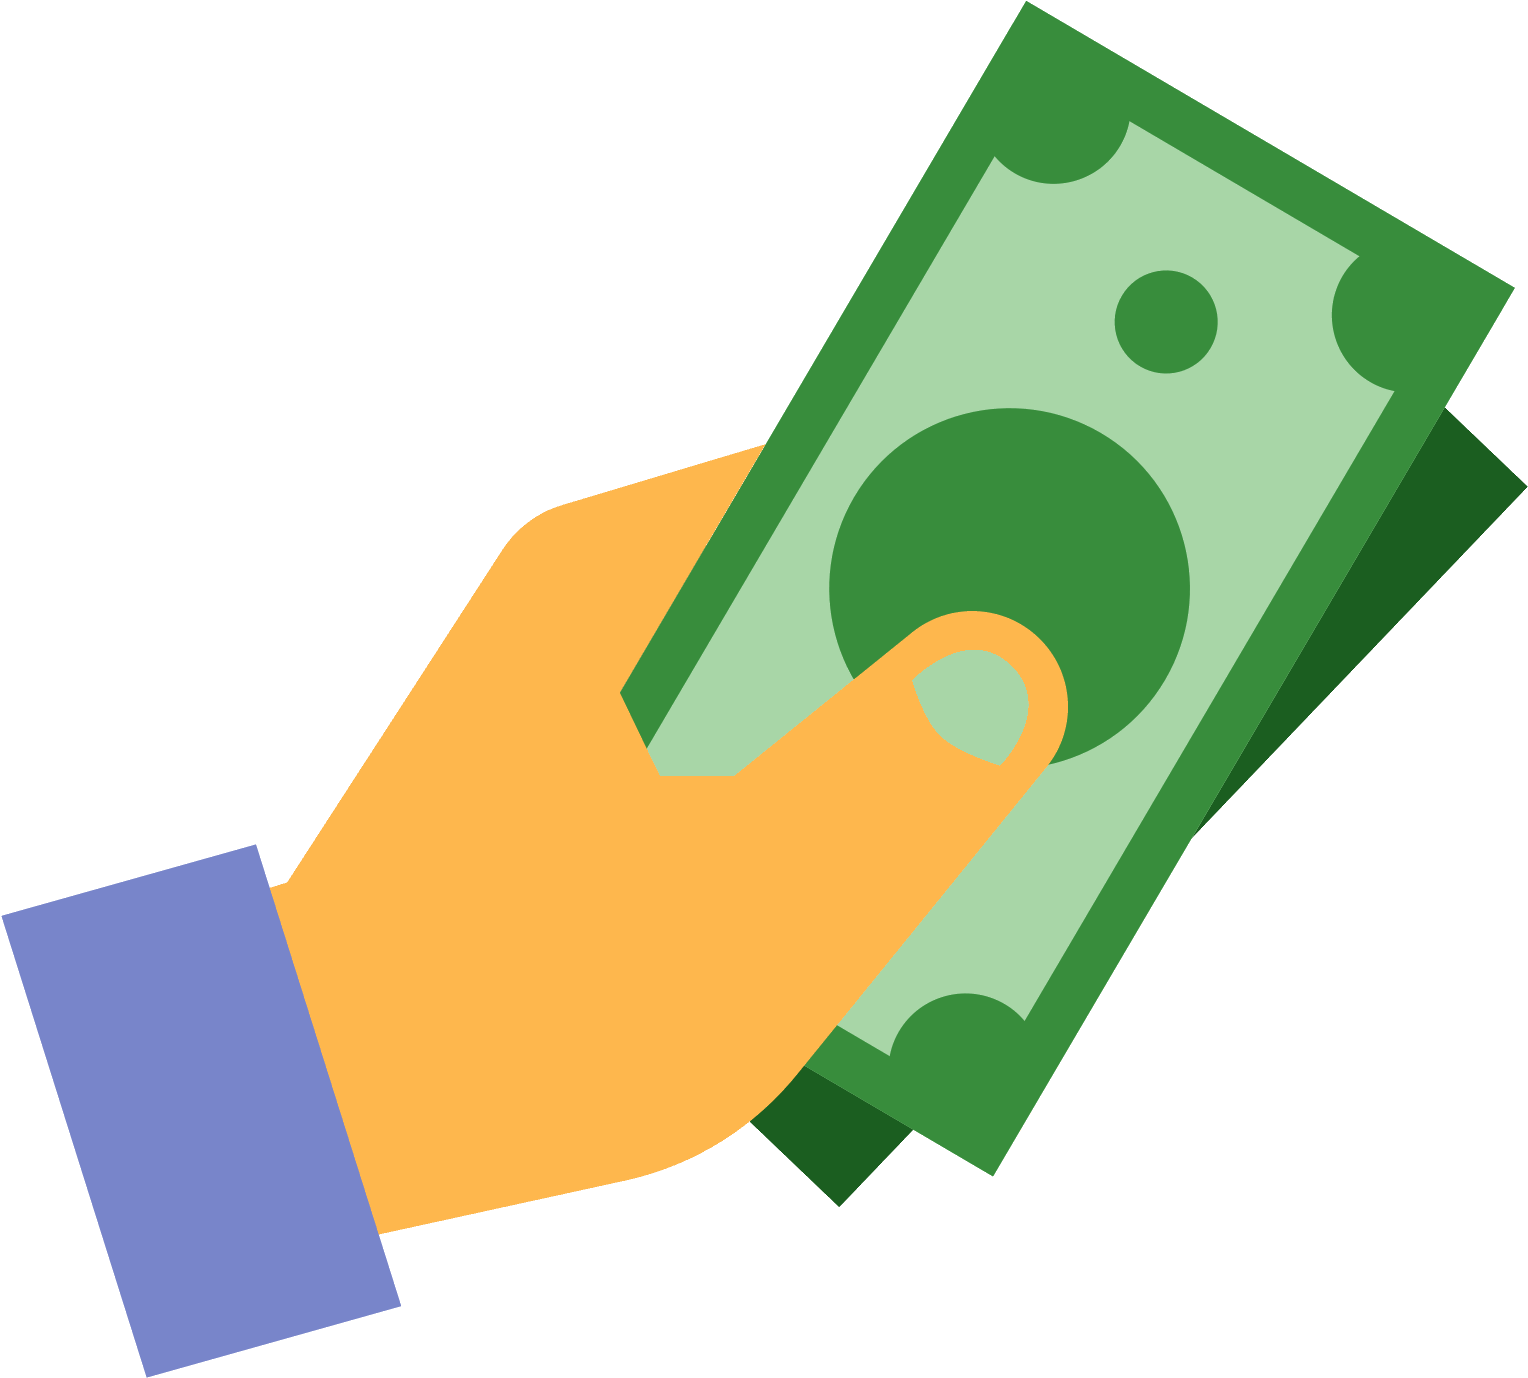 Download Cash In Hand Icon PNG Image with No Background - PNGkey.com